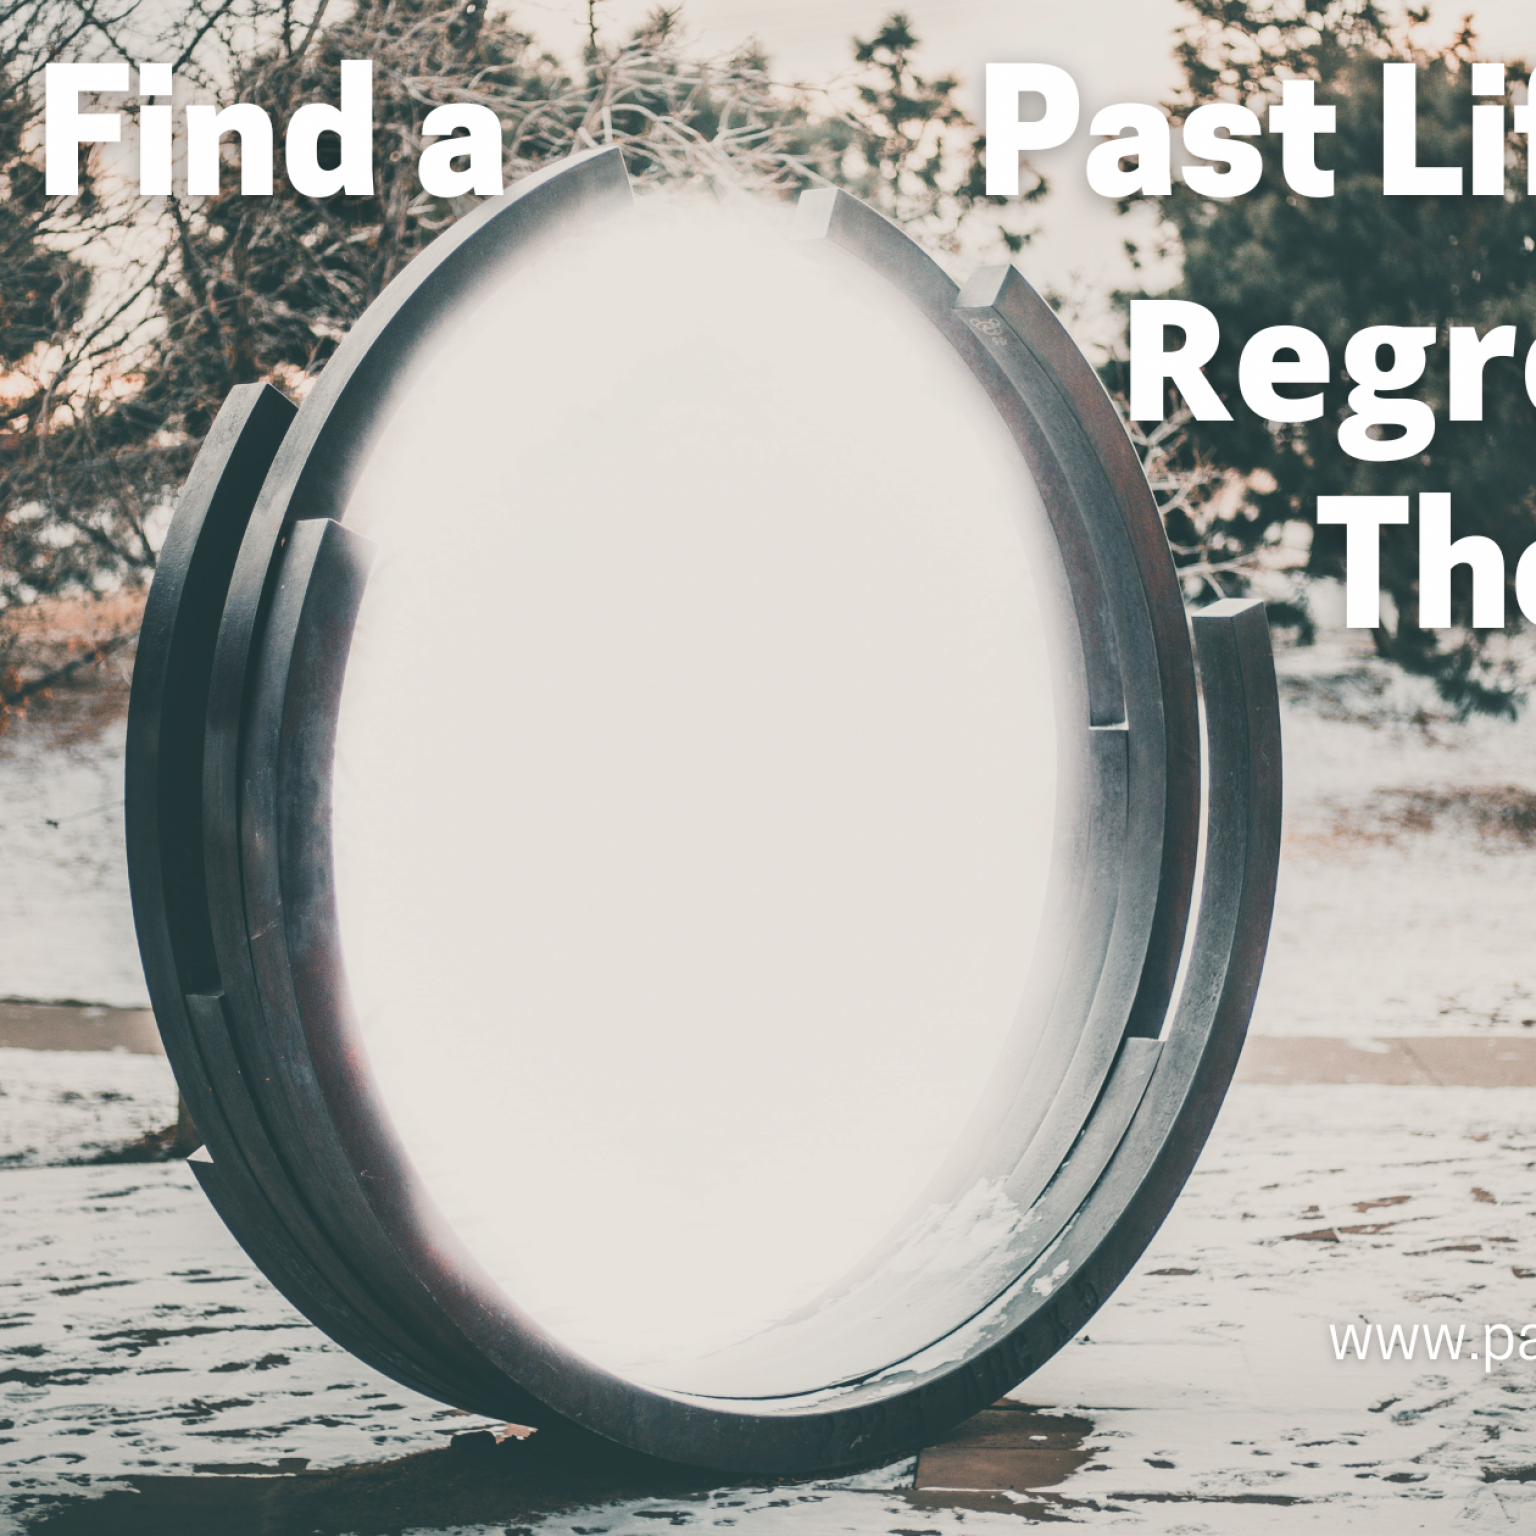 How to Find a past life regression therapist, therapy